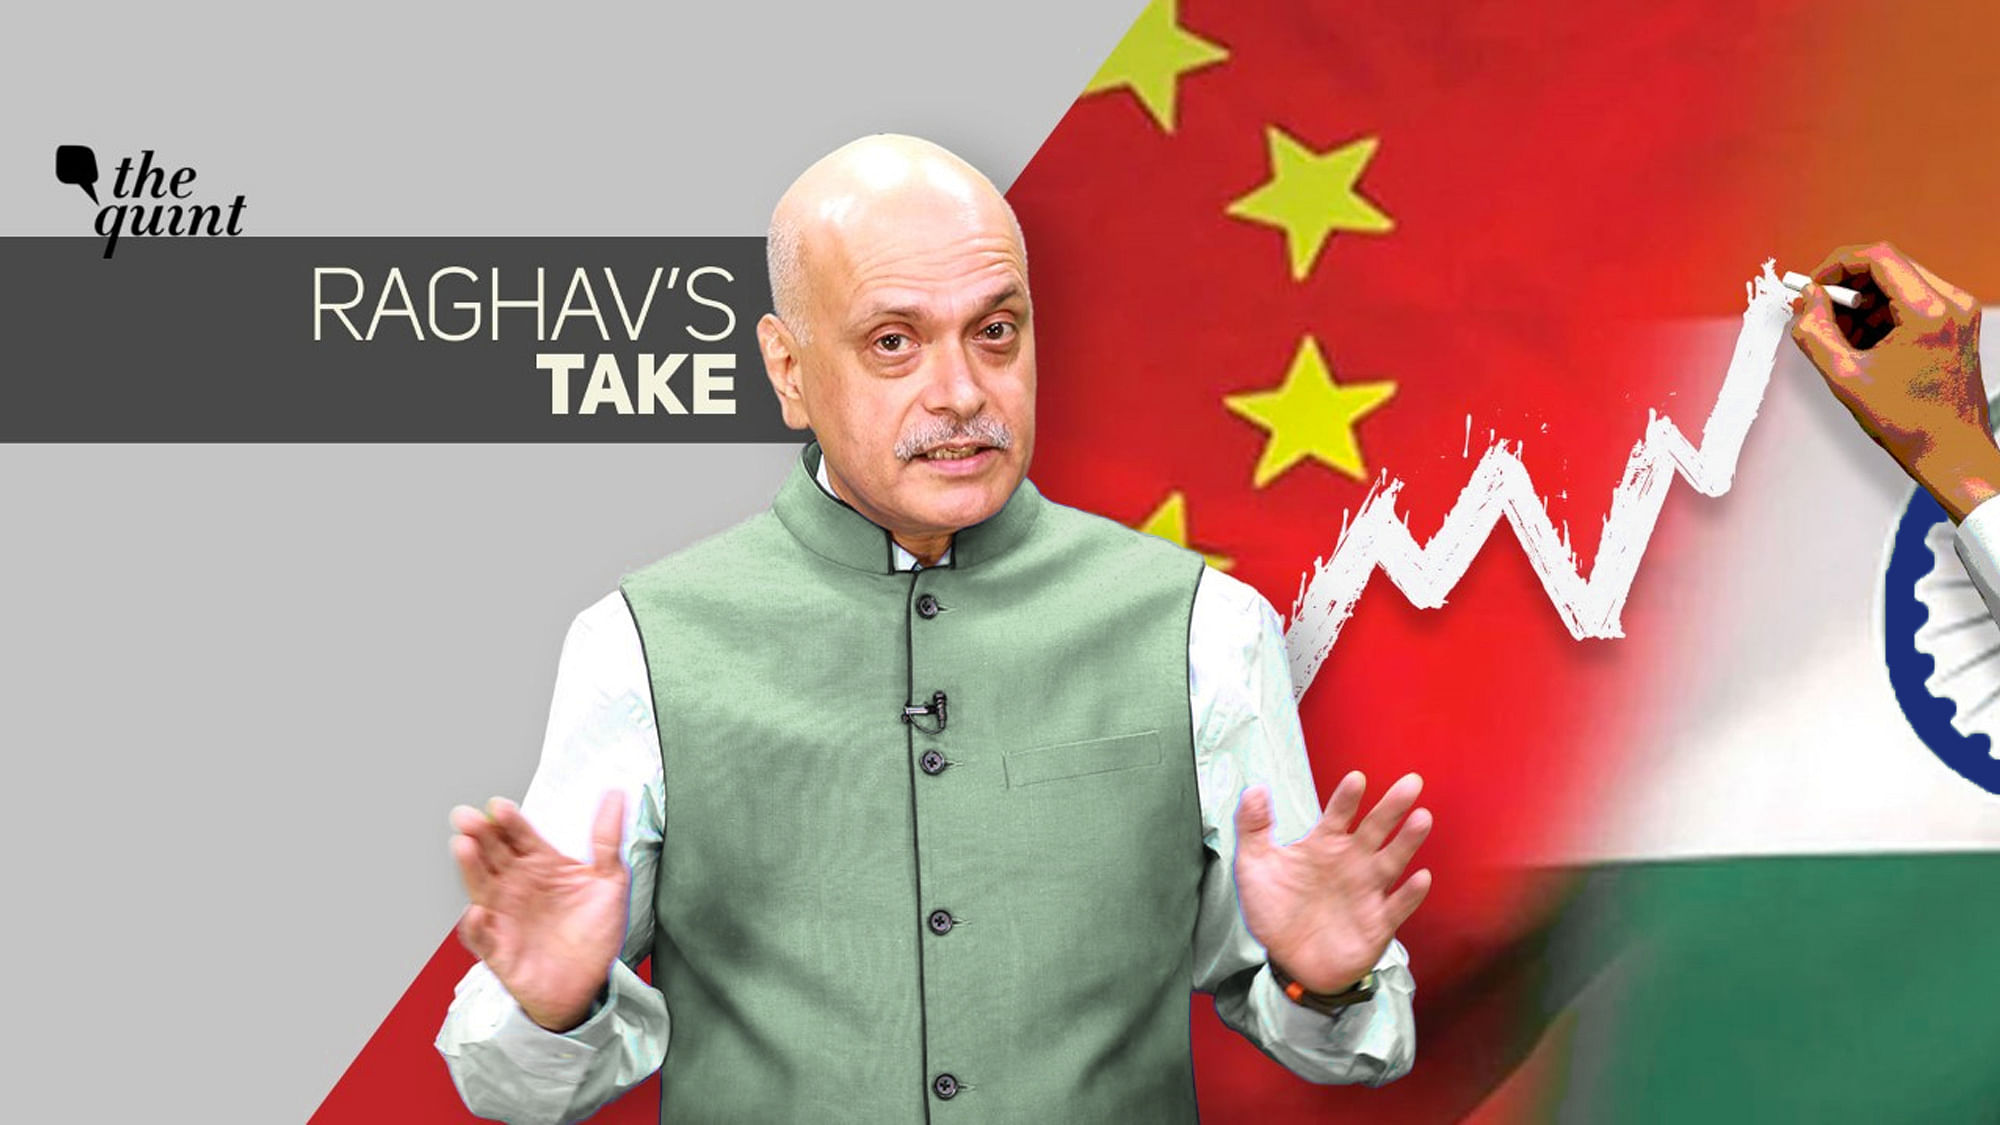 Image of The Quint’s Founder-Editor Raghav Bahl used for representational purposes.